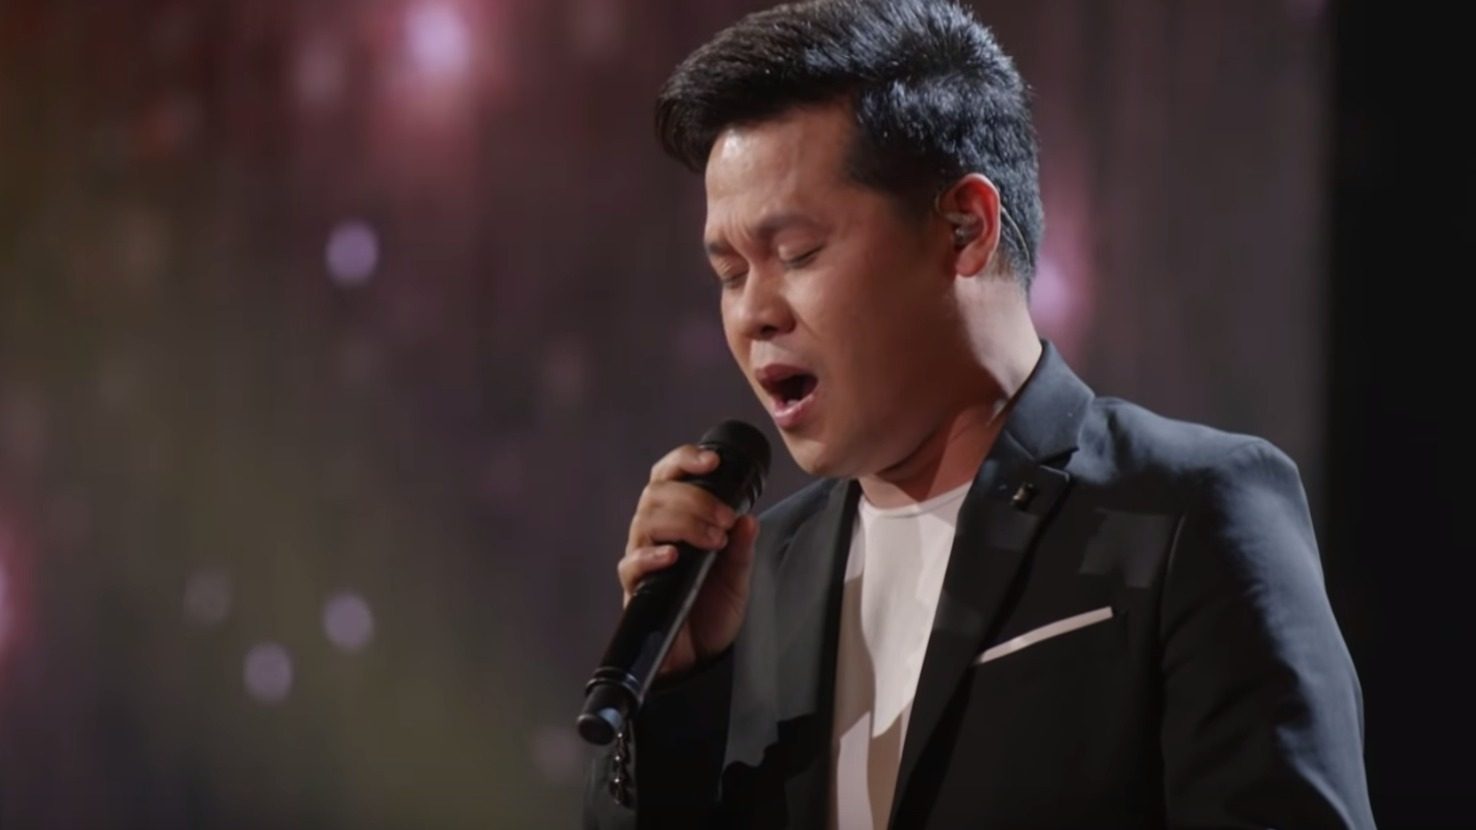 WATCH: Marcelito Pomoy’s showstopping performance on ‘America’s Got Talent’ semi-finals